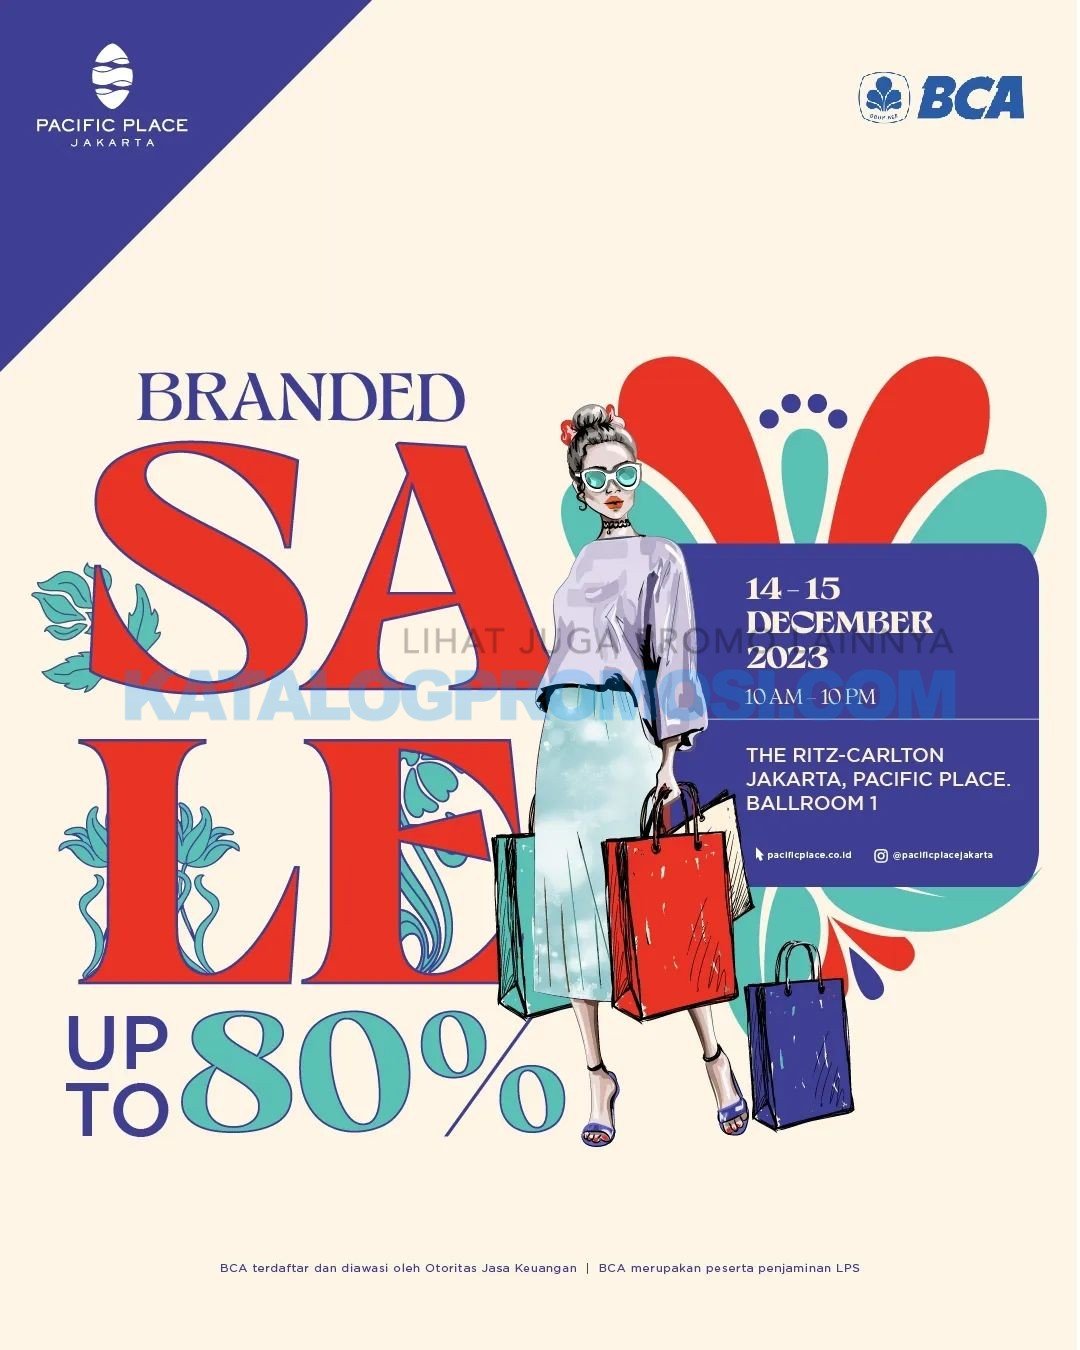 PACIFIC PLACE BRANDED SALE up to 80% mulai tanggal 14-15 DESEMBER 2023